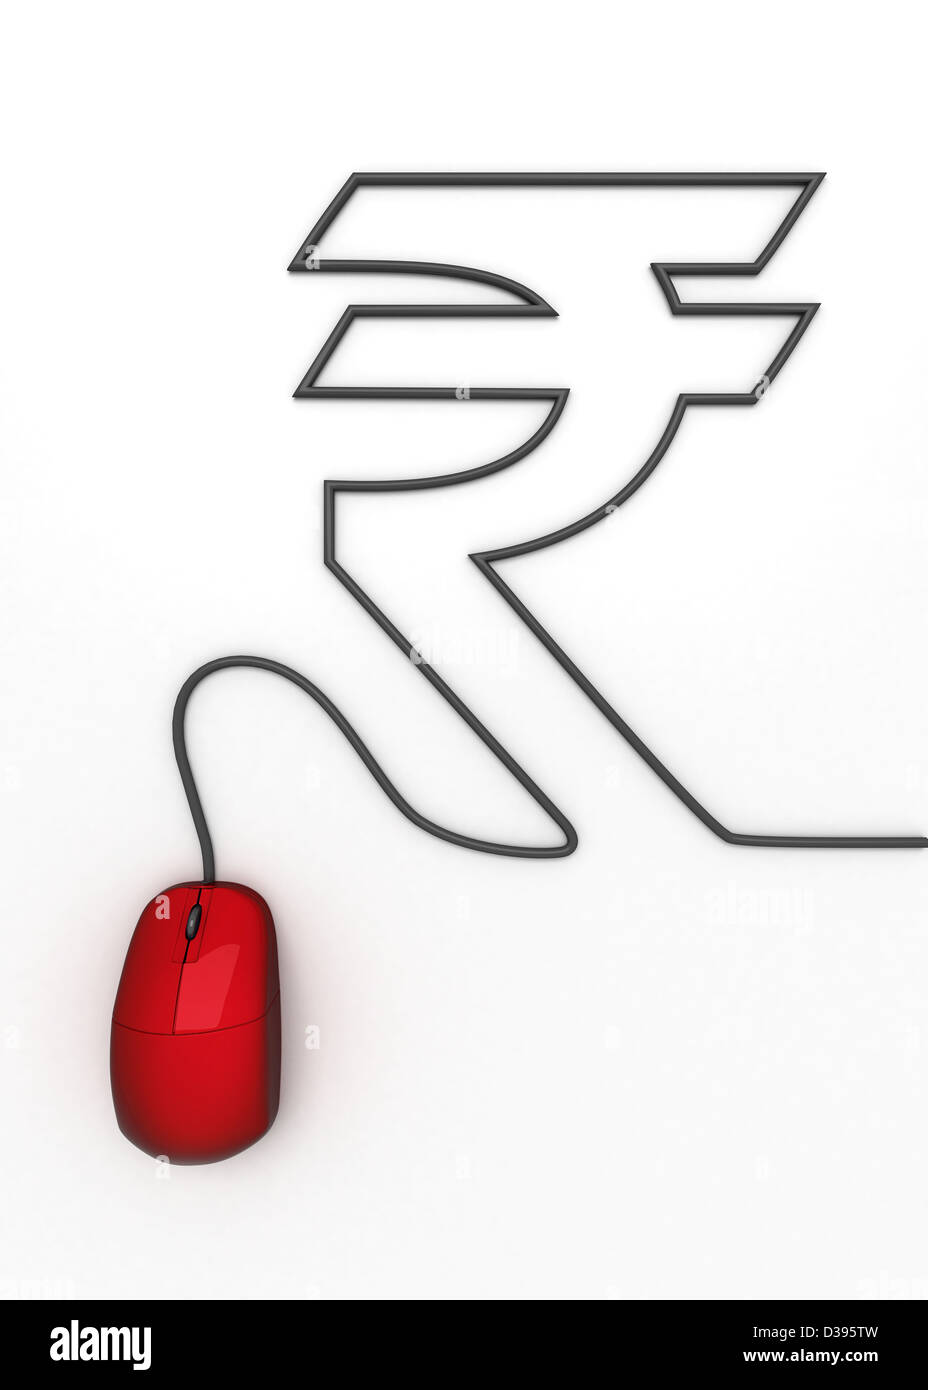 Conceptual image of mouse connecting to Indian Rupee symbol over white background Stock Photo